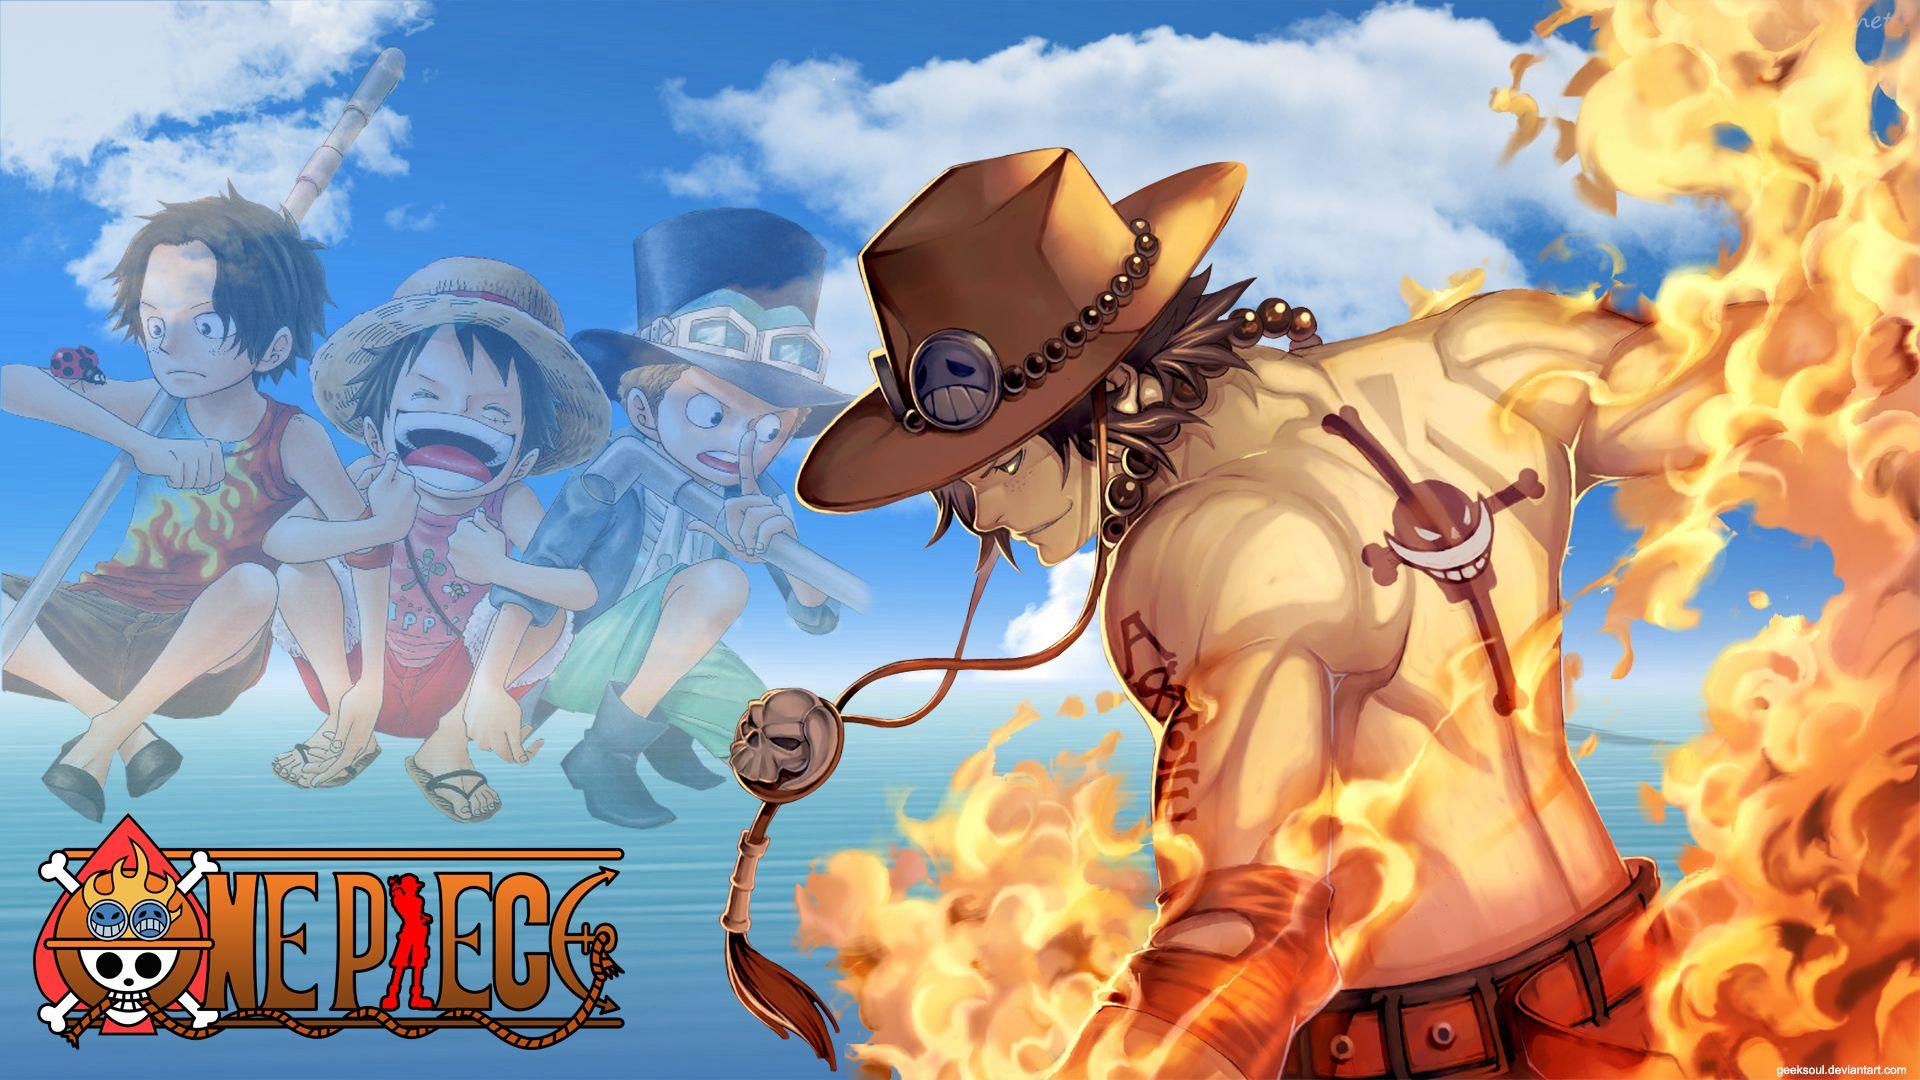 One Piece Ace HD Wallpaper by Geeksoul. Daily Anime Art